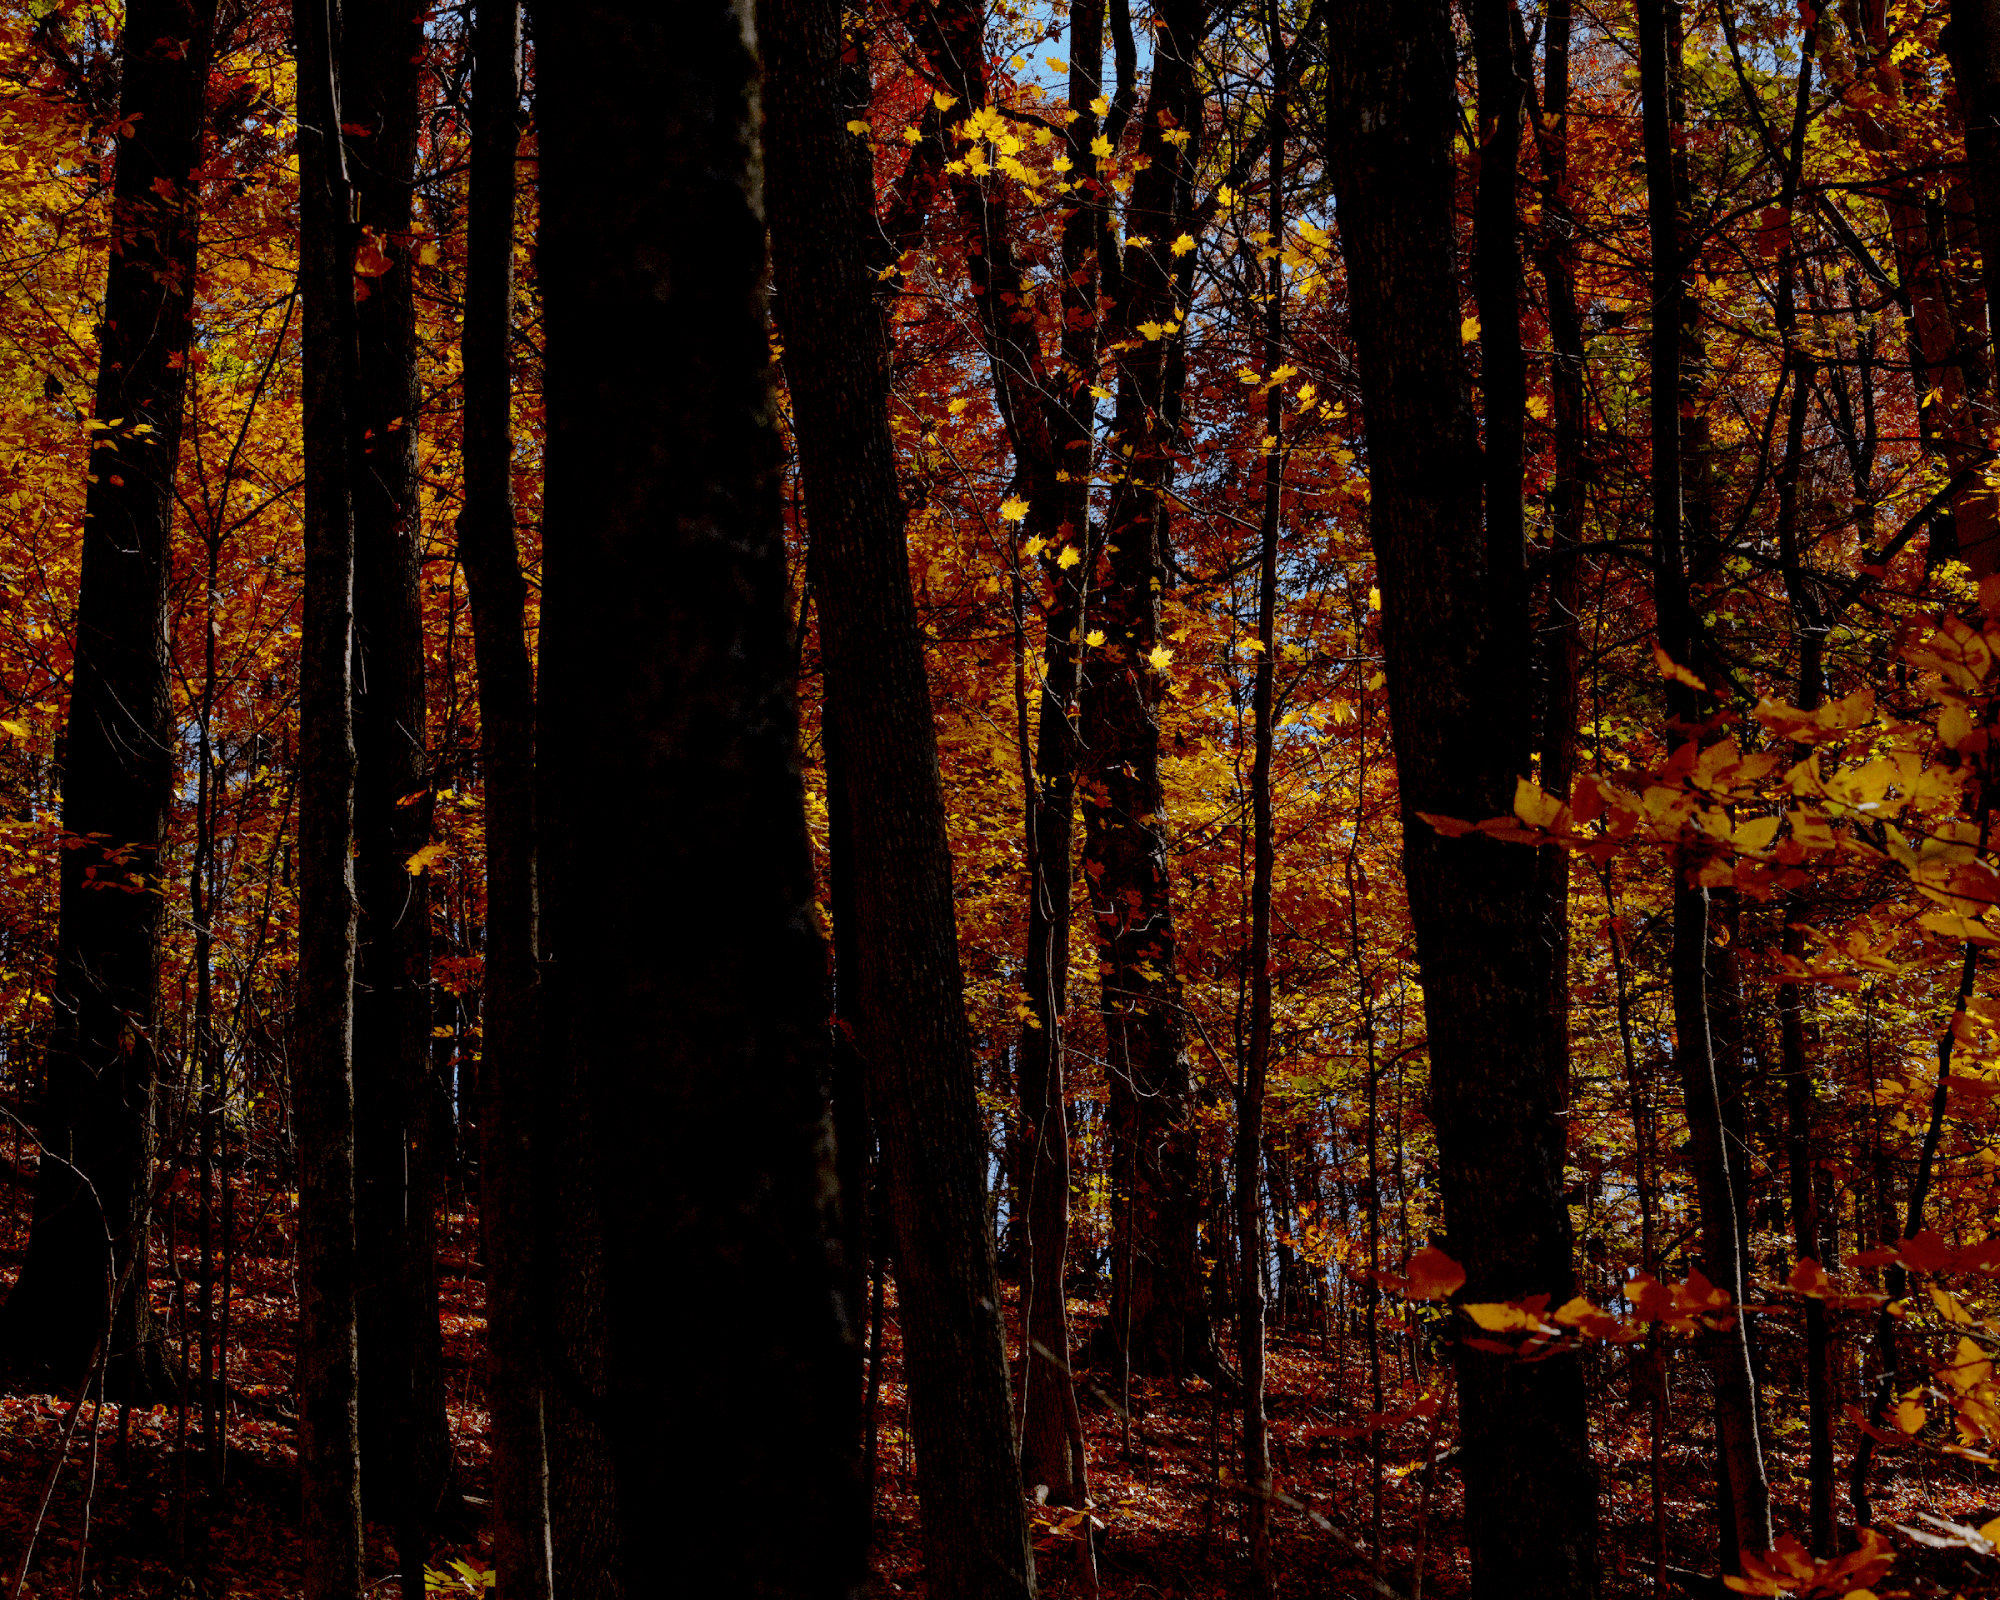 Fall colors at Dysart Woods in Belmont County, near Ohio University’s Eastern Campus.